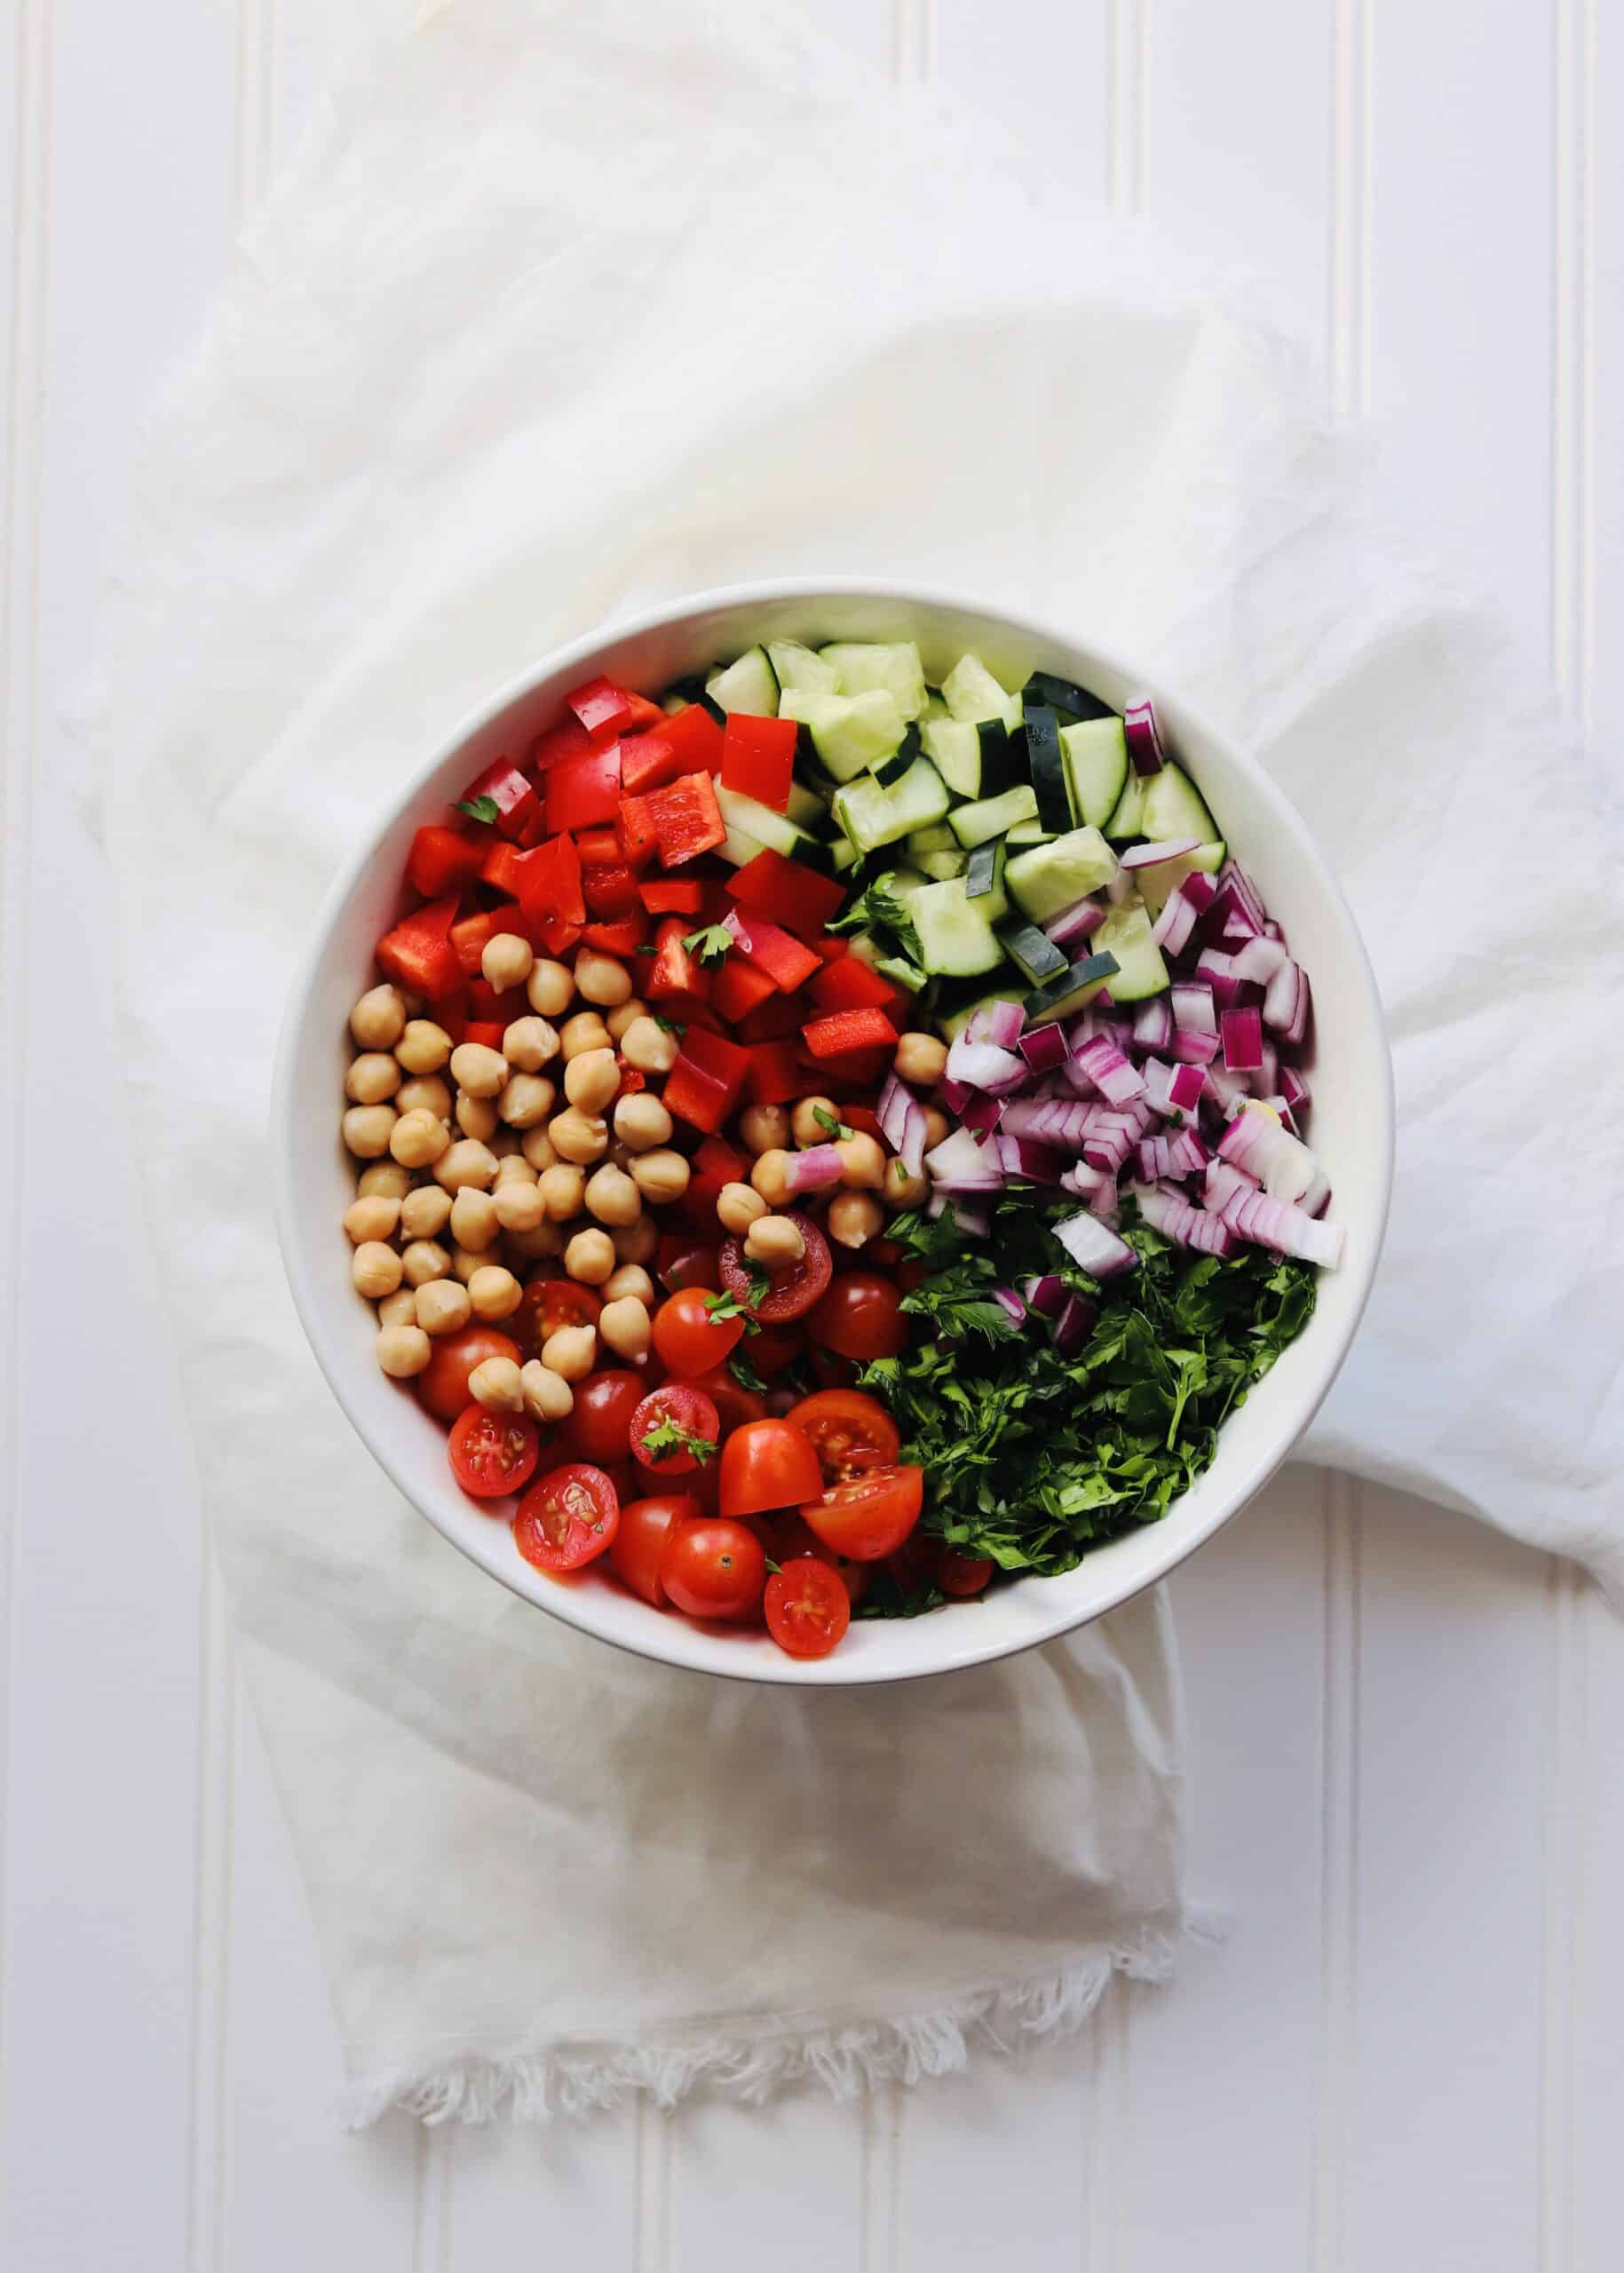 Greek Chickpea Salad is a perfect vegan side dish. No cooking, healthy, clean ingredients and keeps well in the fridge. Add this recipe to your meal prep rotation!